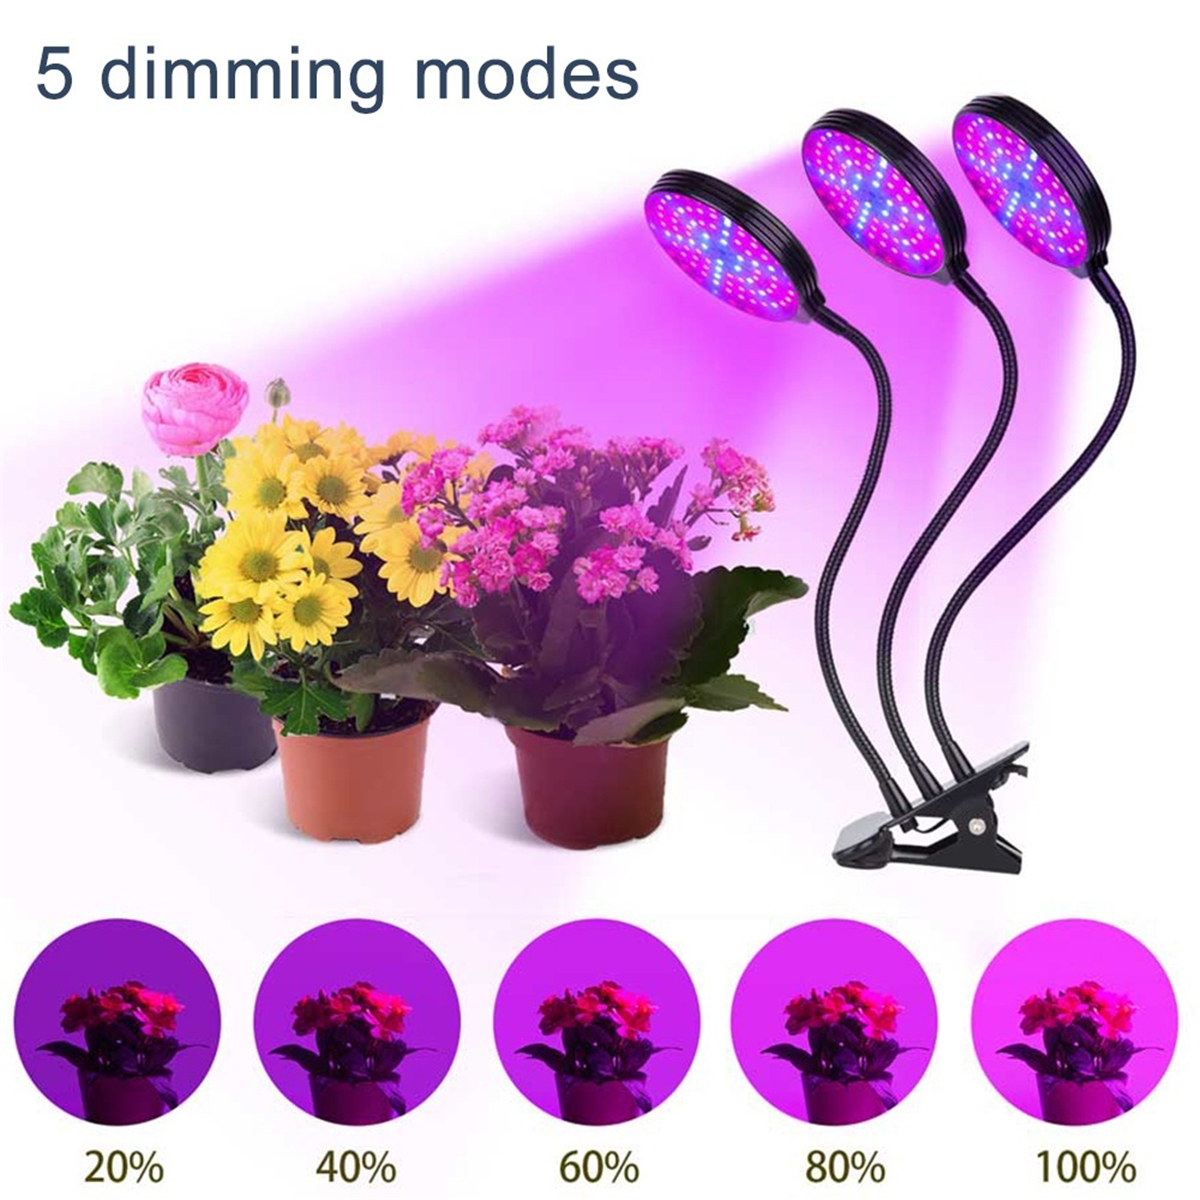 1/2/3 Head Plant Grow Light Head LED Lamp Hydroponics Greenhouse Garden 360° Flexible Indoor Dimmable